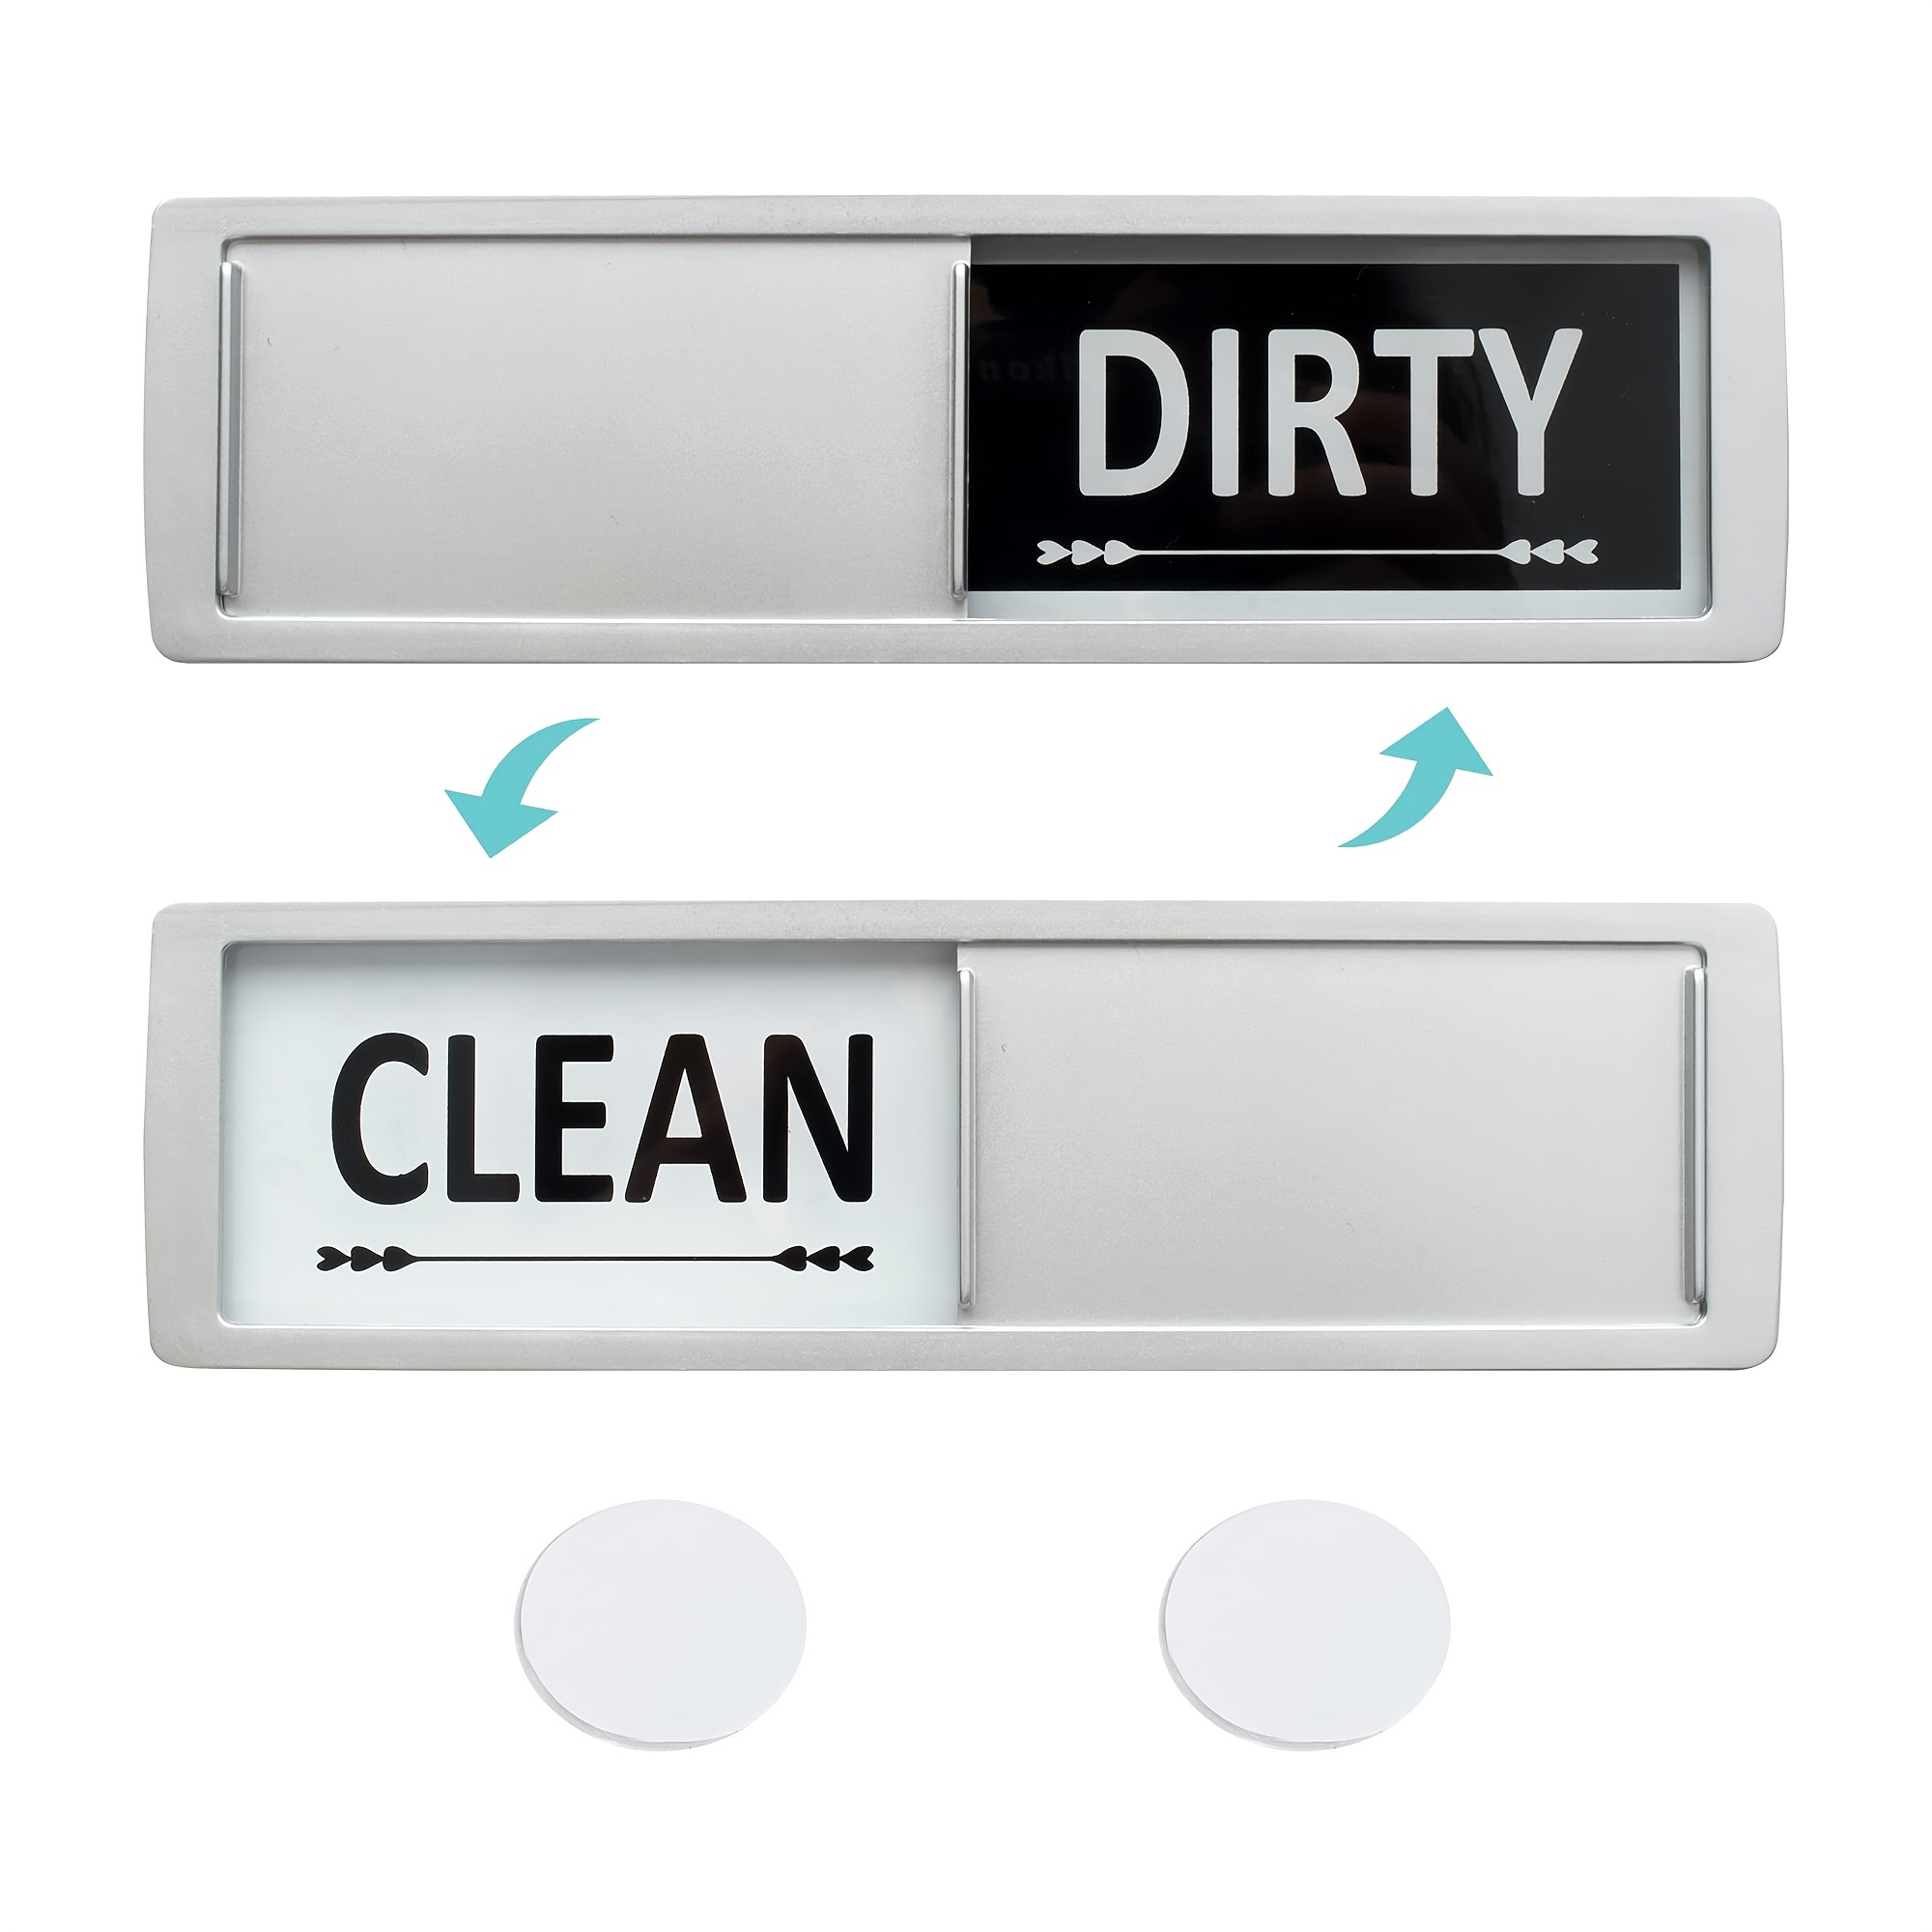 Clean-Dirty-Running dishwasher magnet (on white)